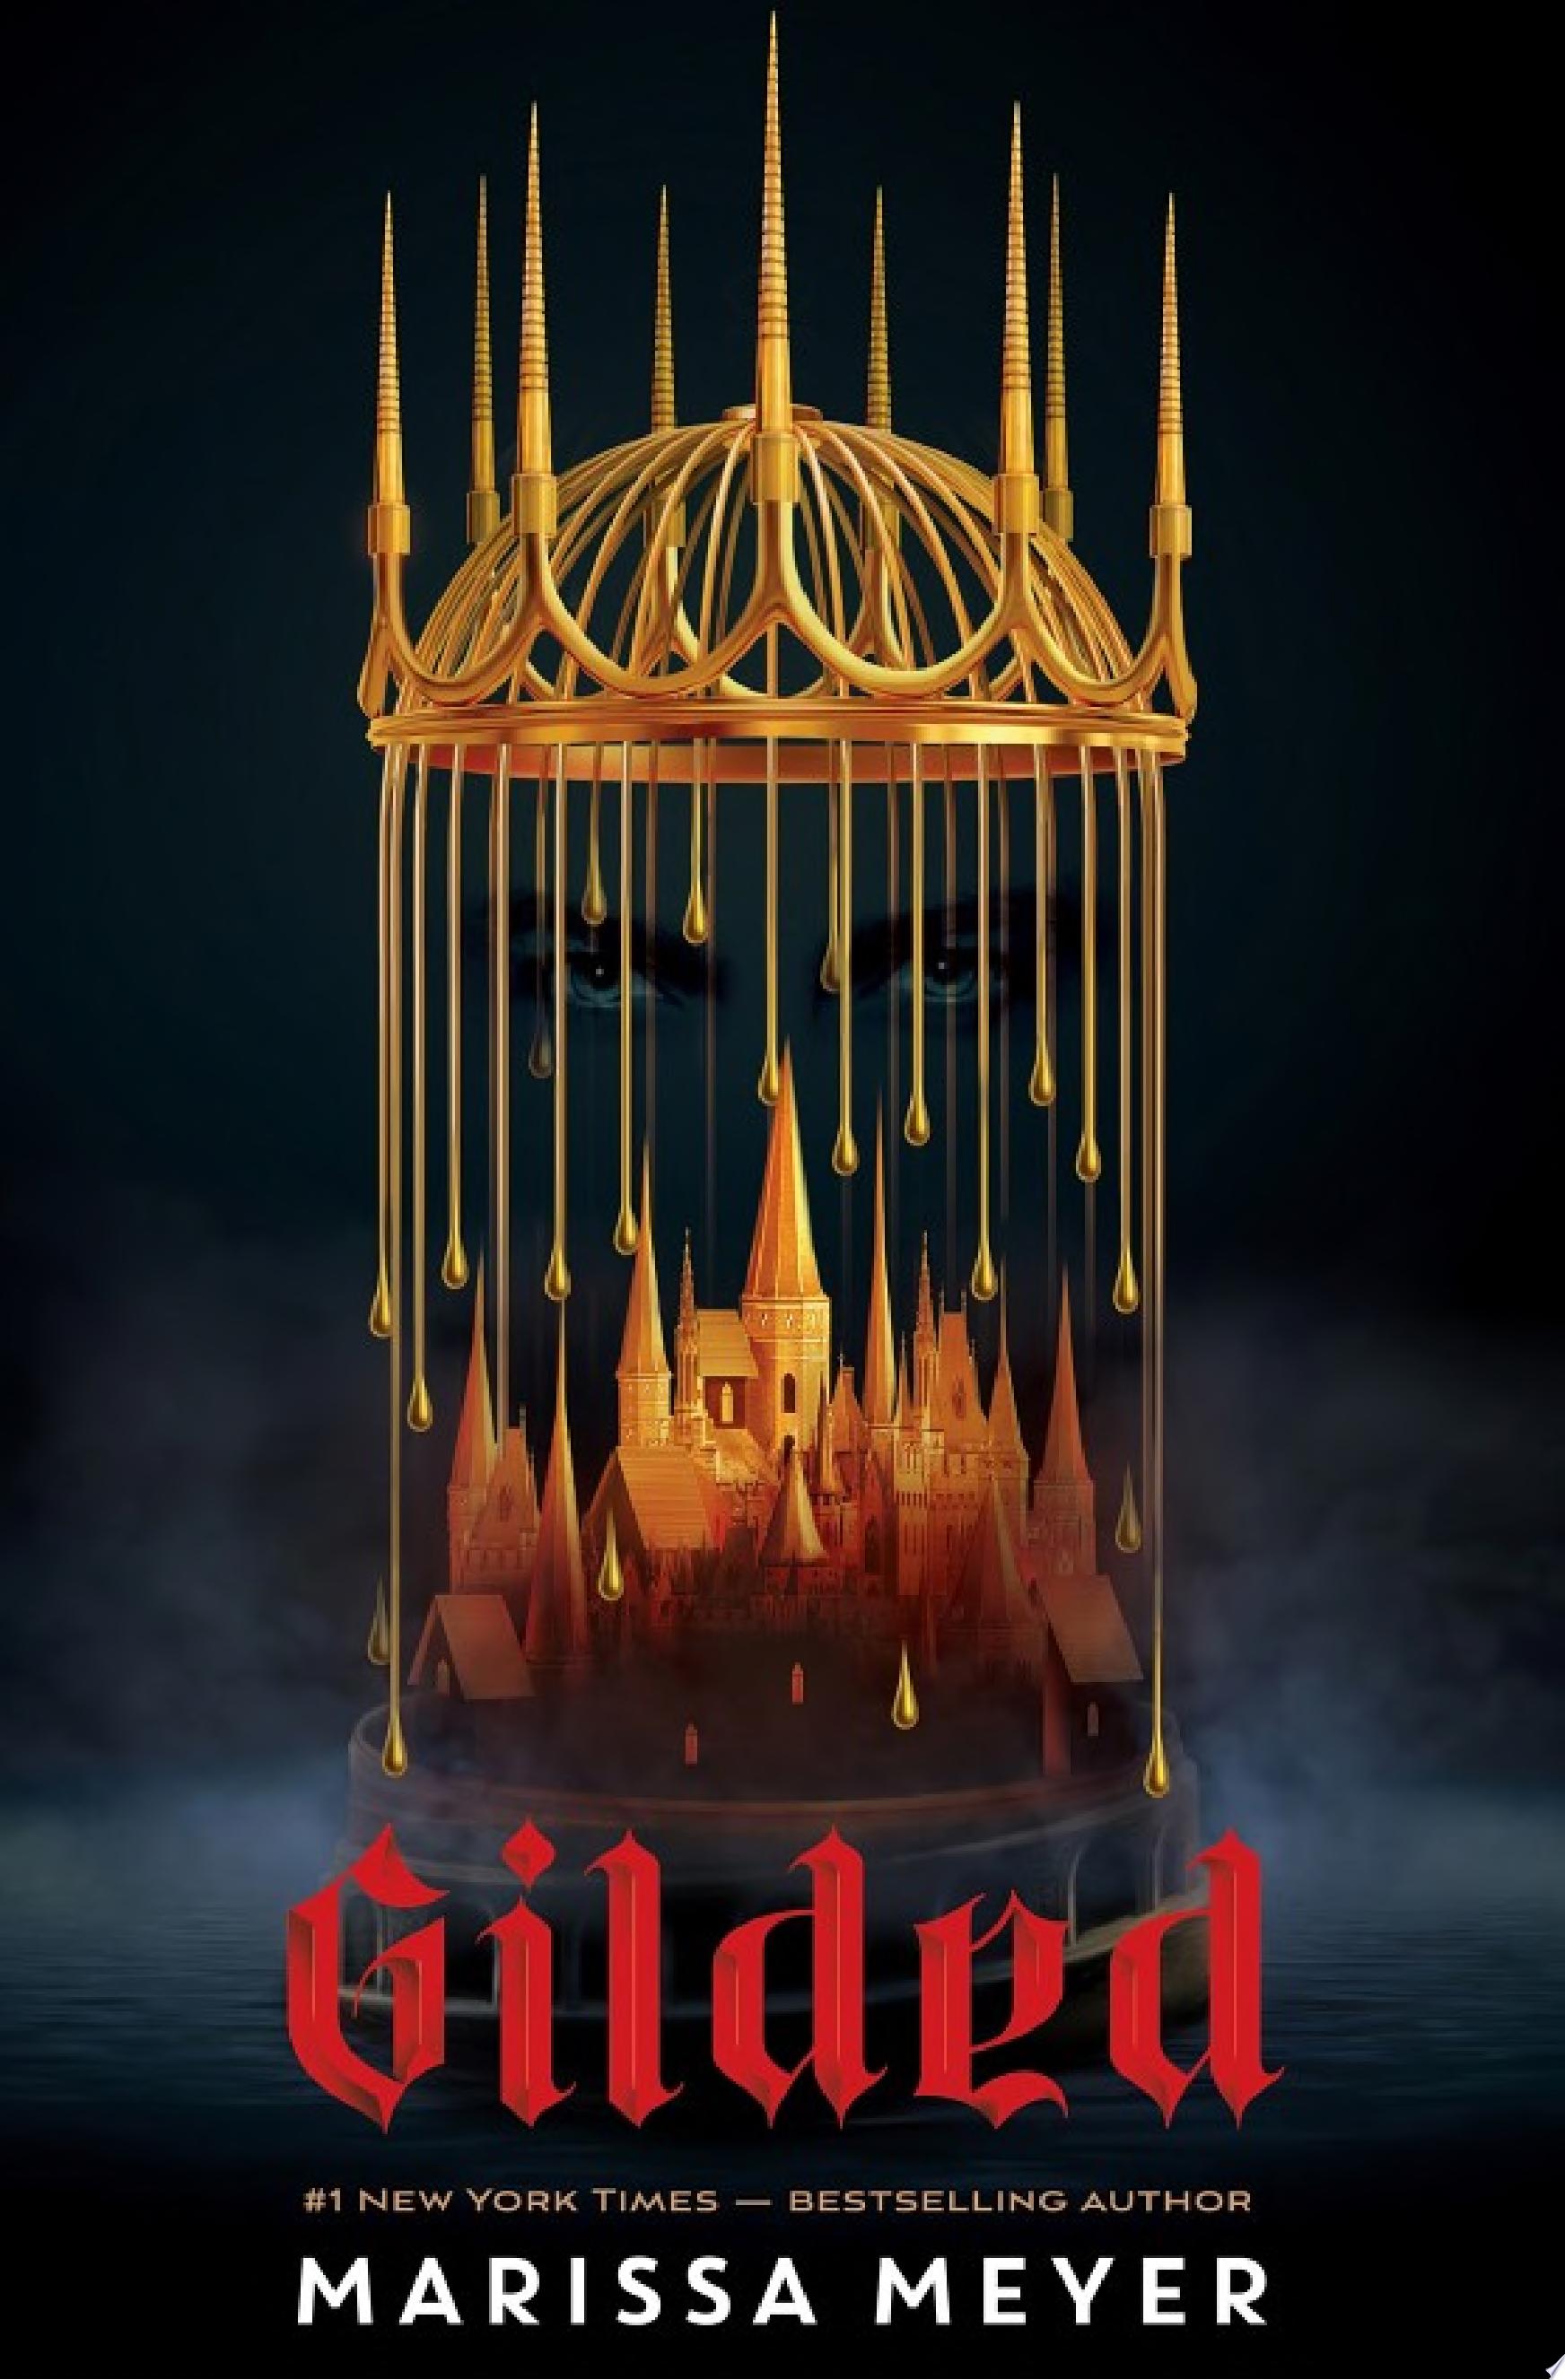 Image for "Gilded"